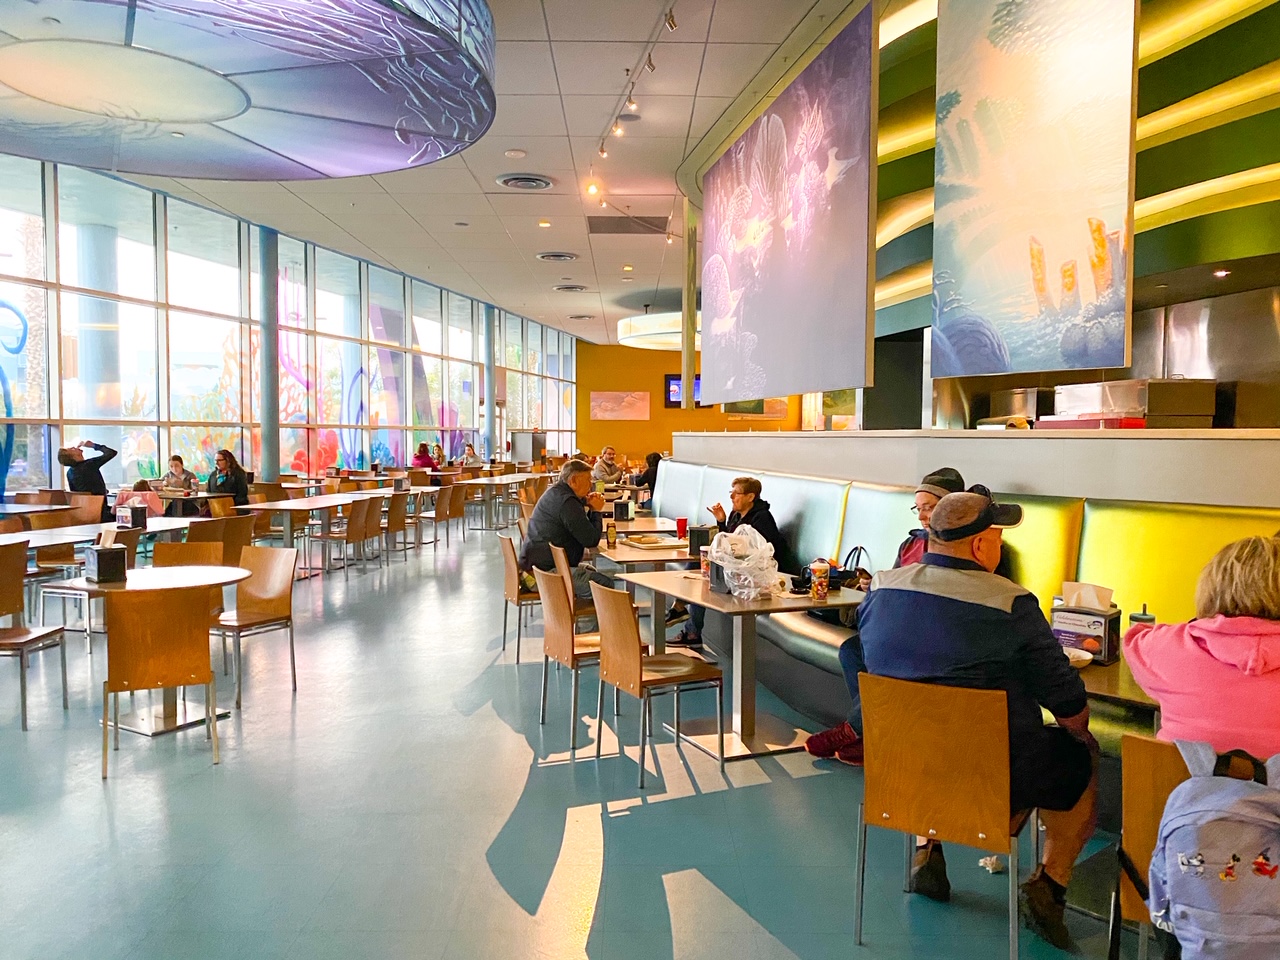 view of the seating area in Landscape of Flavors, the food court at Art of Animation